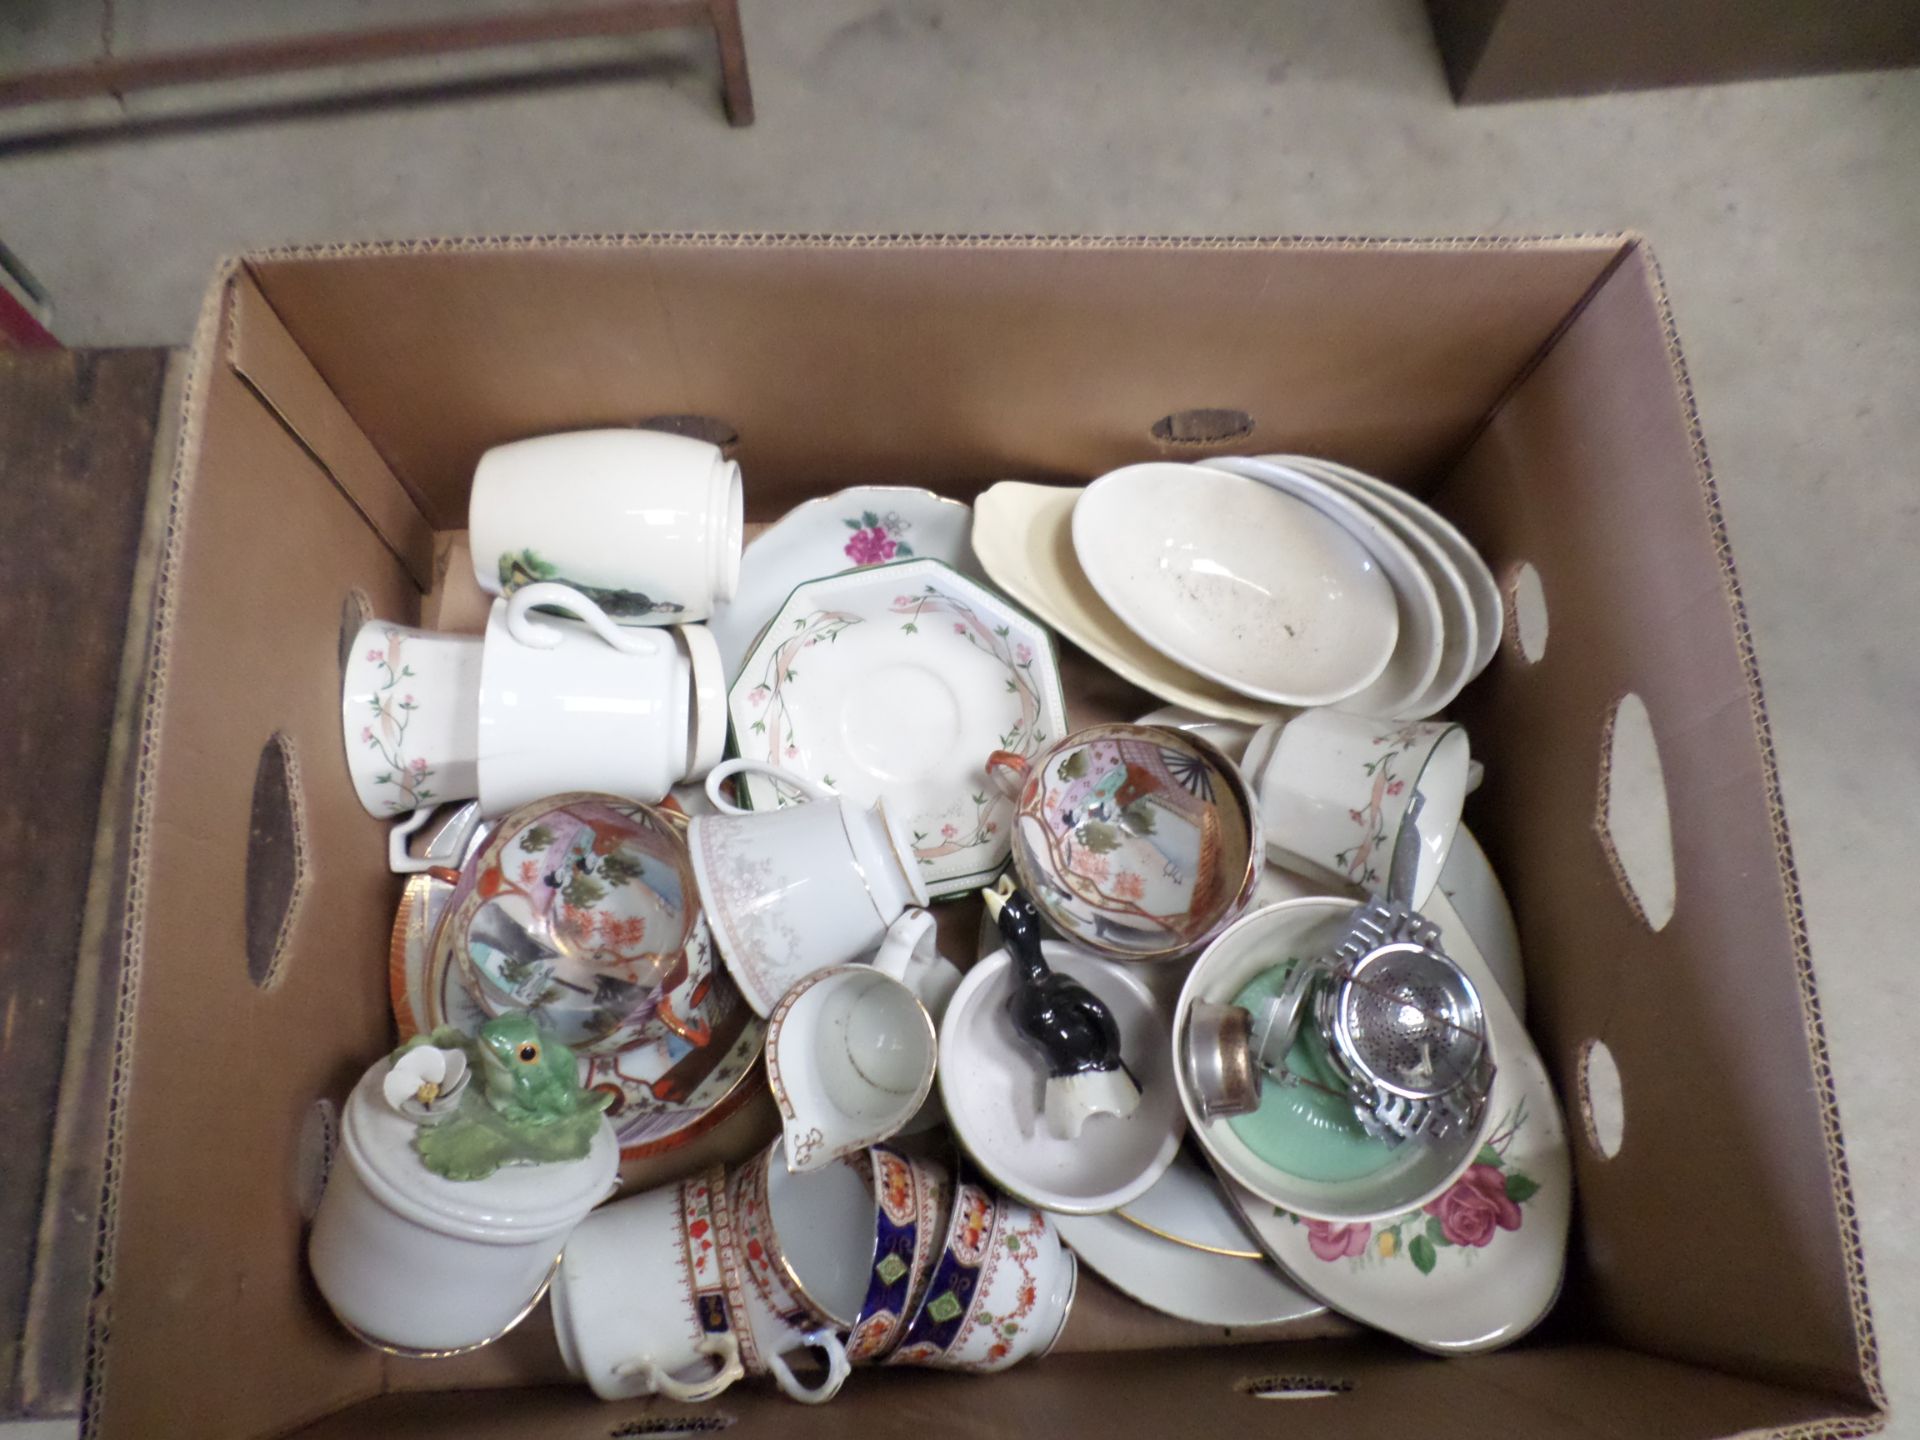 2 boxes of ornaments and tableware